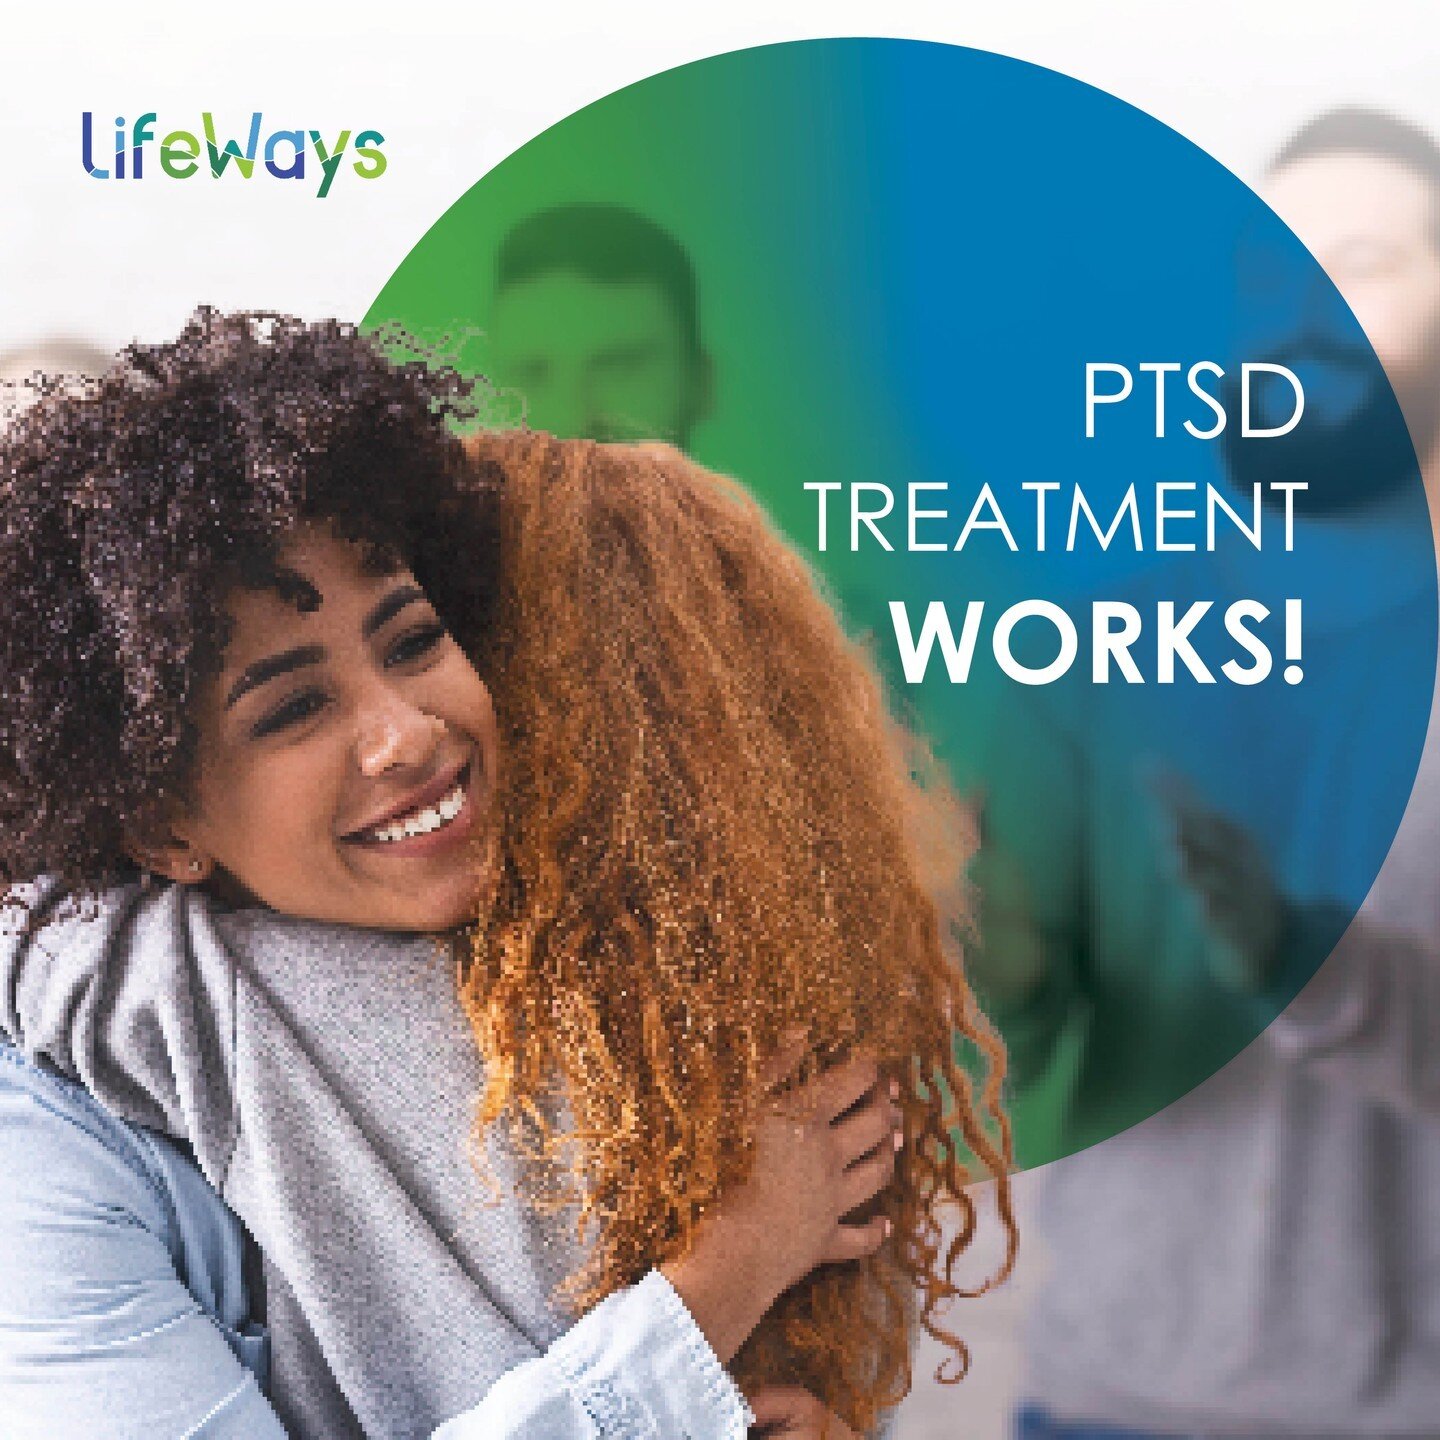 Posttraumatic Stress Disorder (PTSD) treatment works!

There are many types of treatment that can alleviate the symptoms of PTSD. There are various therapy techniques, as well as evidence that medication may be useful for people struggling with sympt